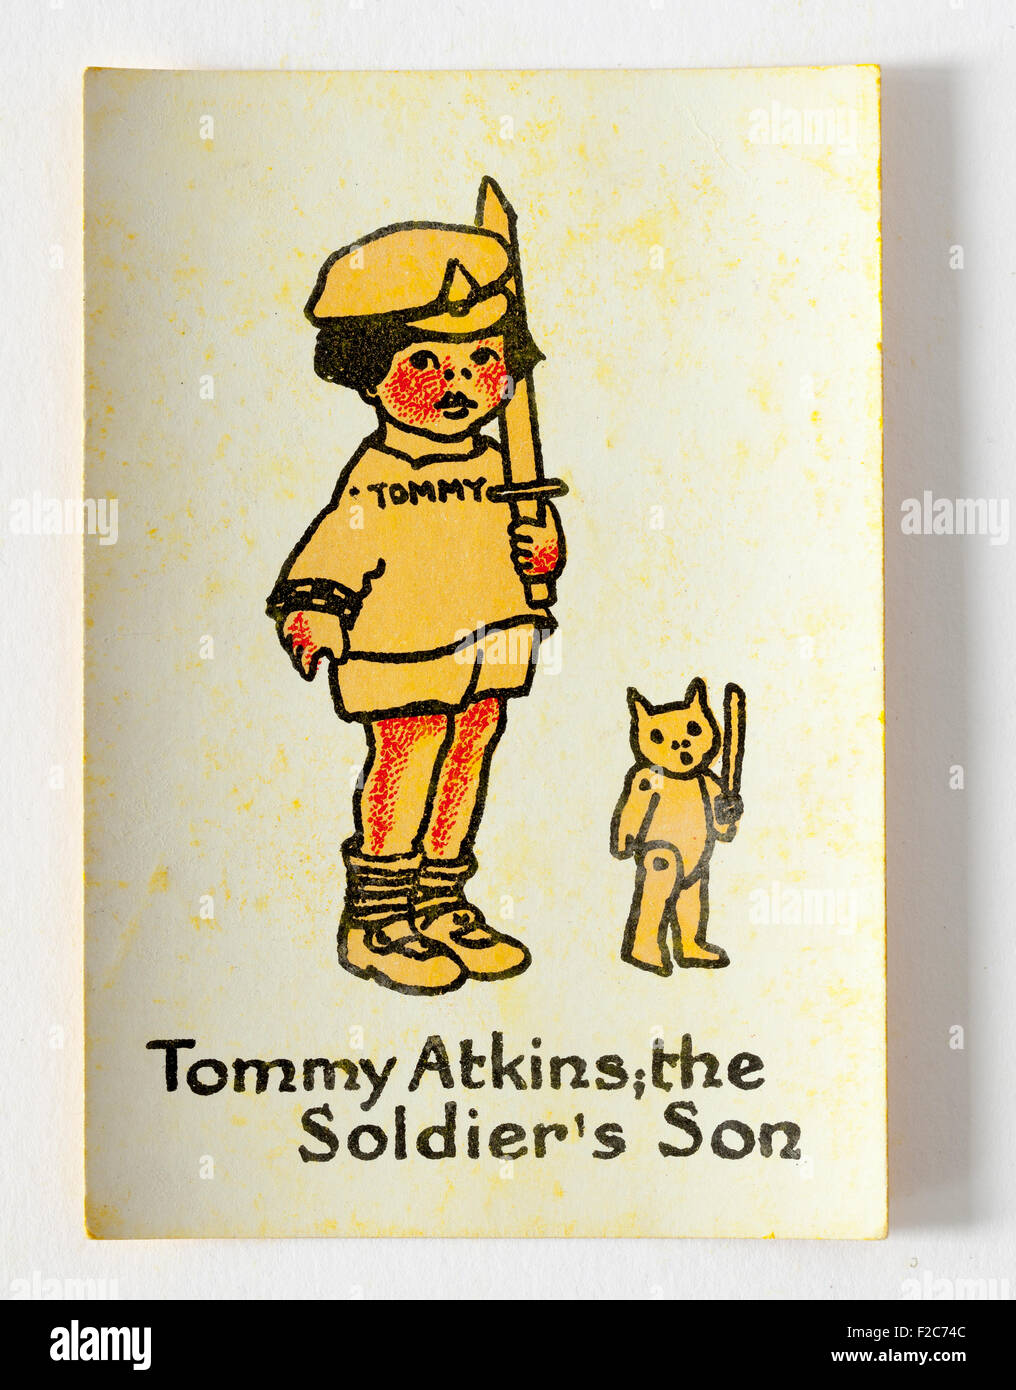 Tommy Atkins the Soldiers Son Playing Card from Vintage Happy Families Game Stock Photo